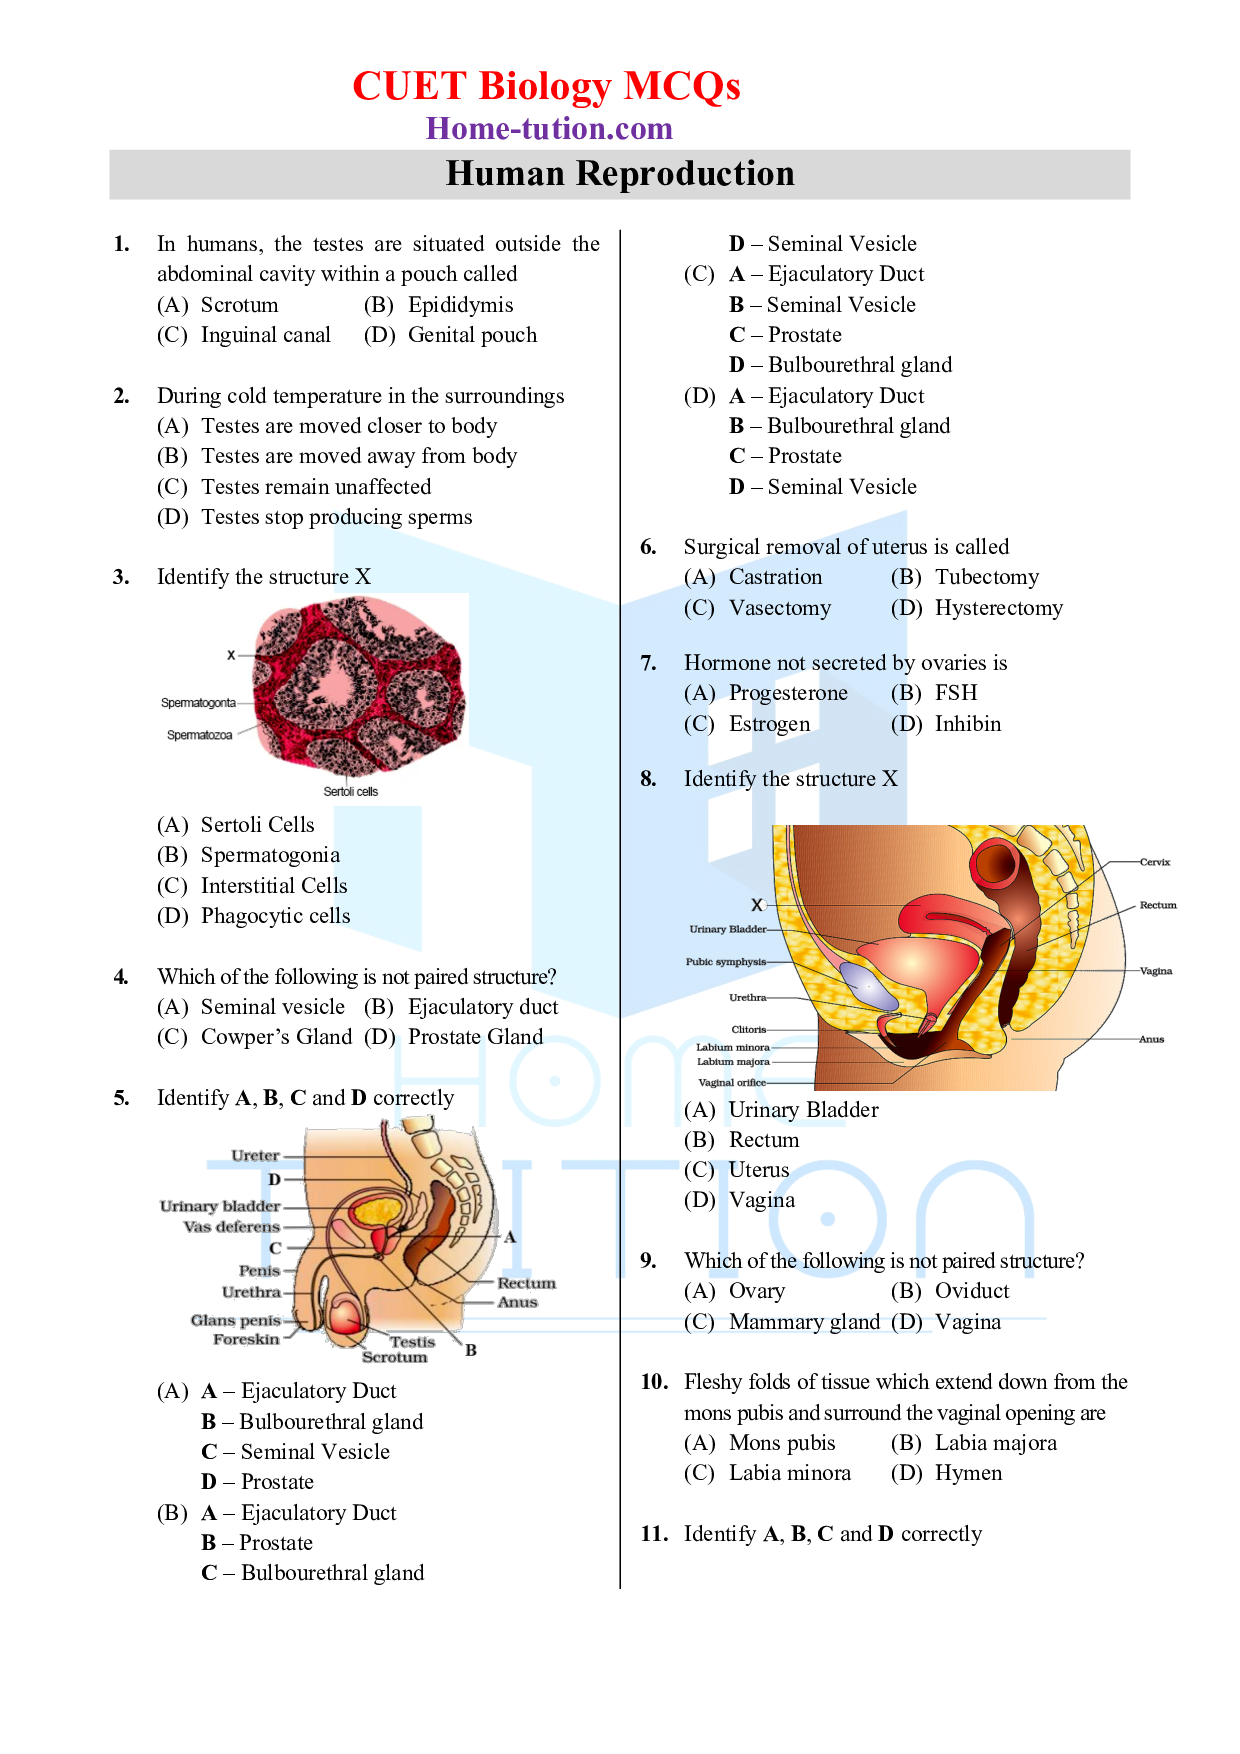 Biology MCQ Questions for CUET Chapter 3 Human Reproduction